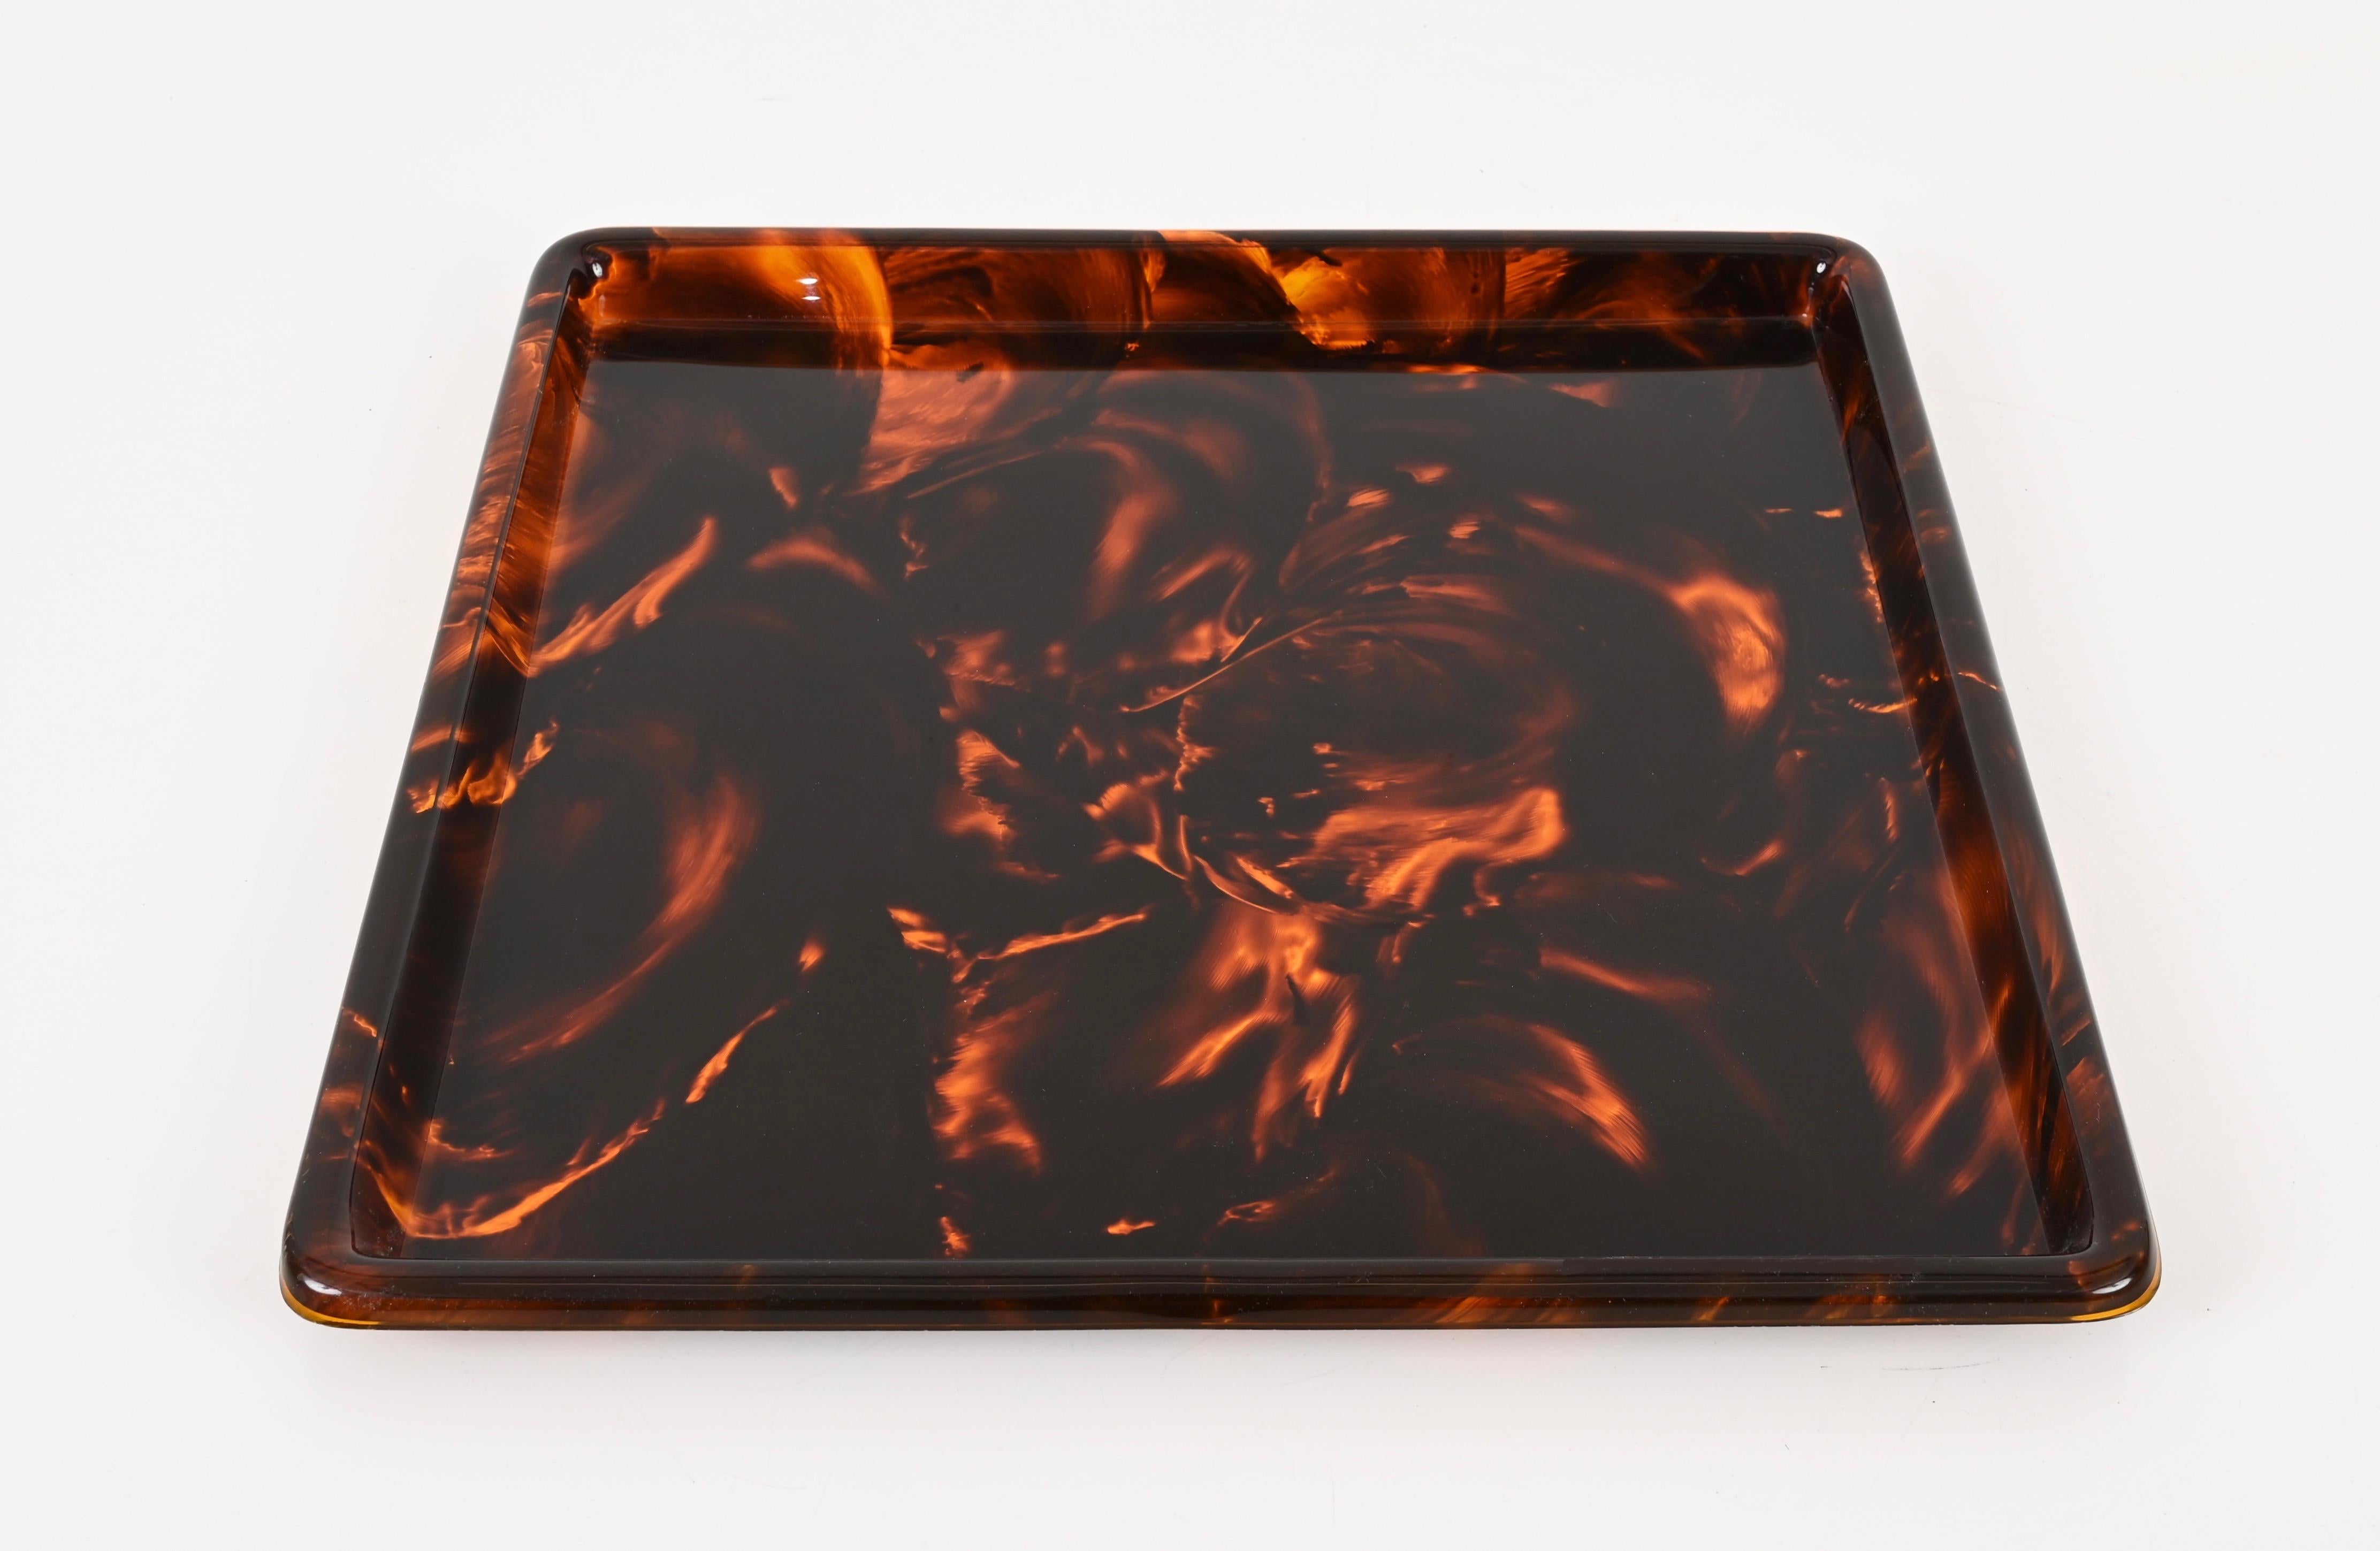 Gorgeous large Mid-Century square serving tray in tortoiseshell lucite. This stunning tray was produced in Italy in the 1970s.  Its design is in the style of Willy Rizzo for a Christian Dior home production.

The quality of the lucite in this square